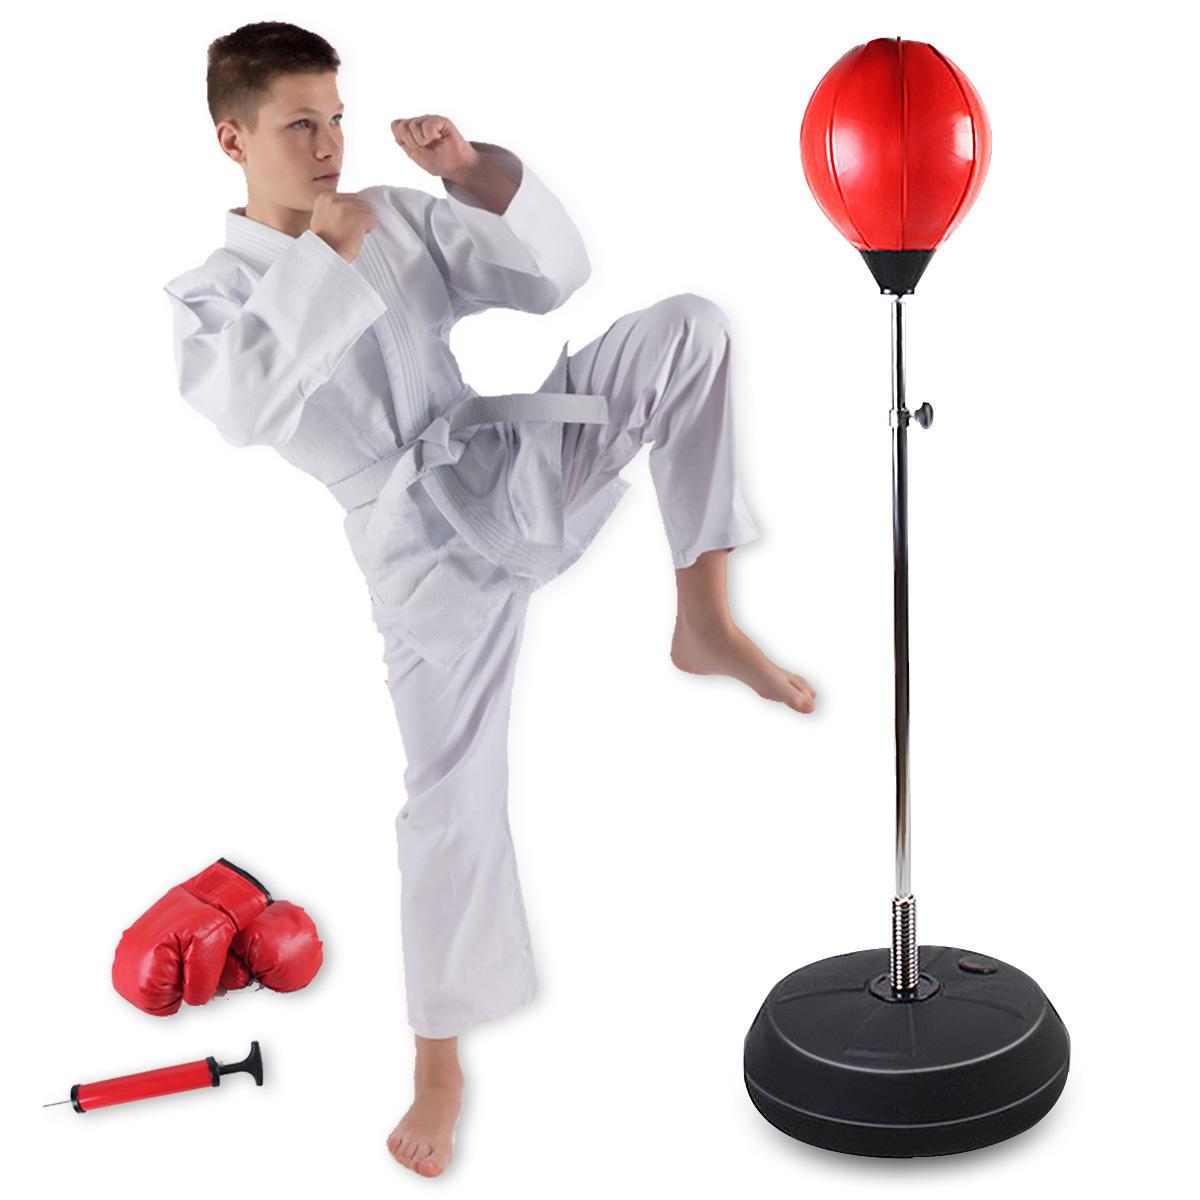 young boy wearing karate outfit kicking free standing red punching bag with black base